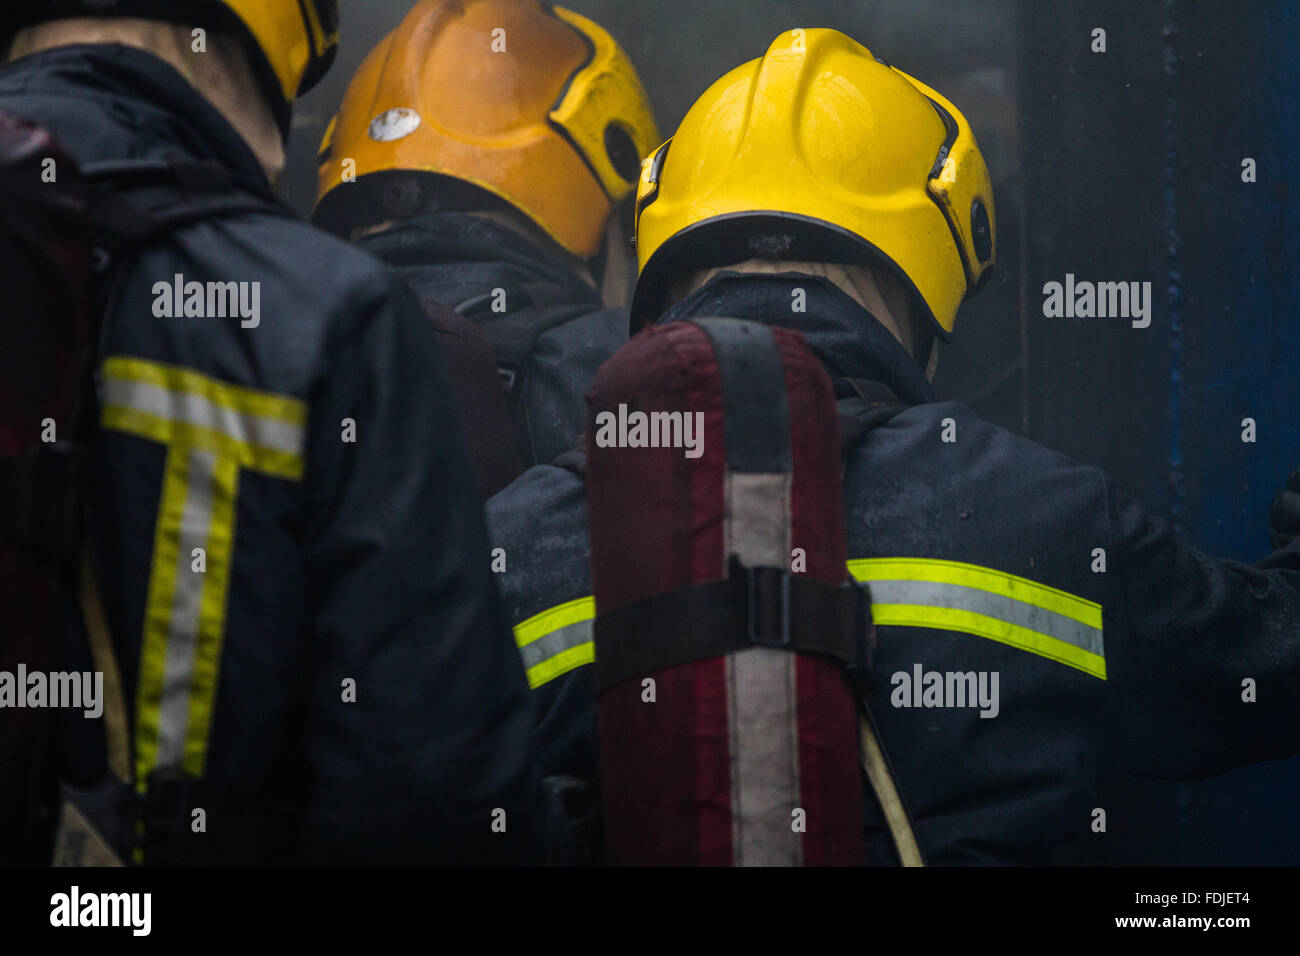 Seafarers and offshore workers during firefighting training Stock Photo